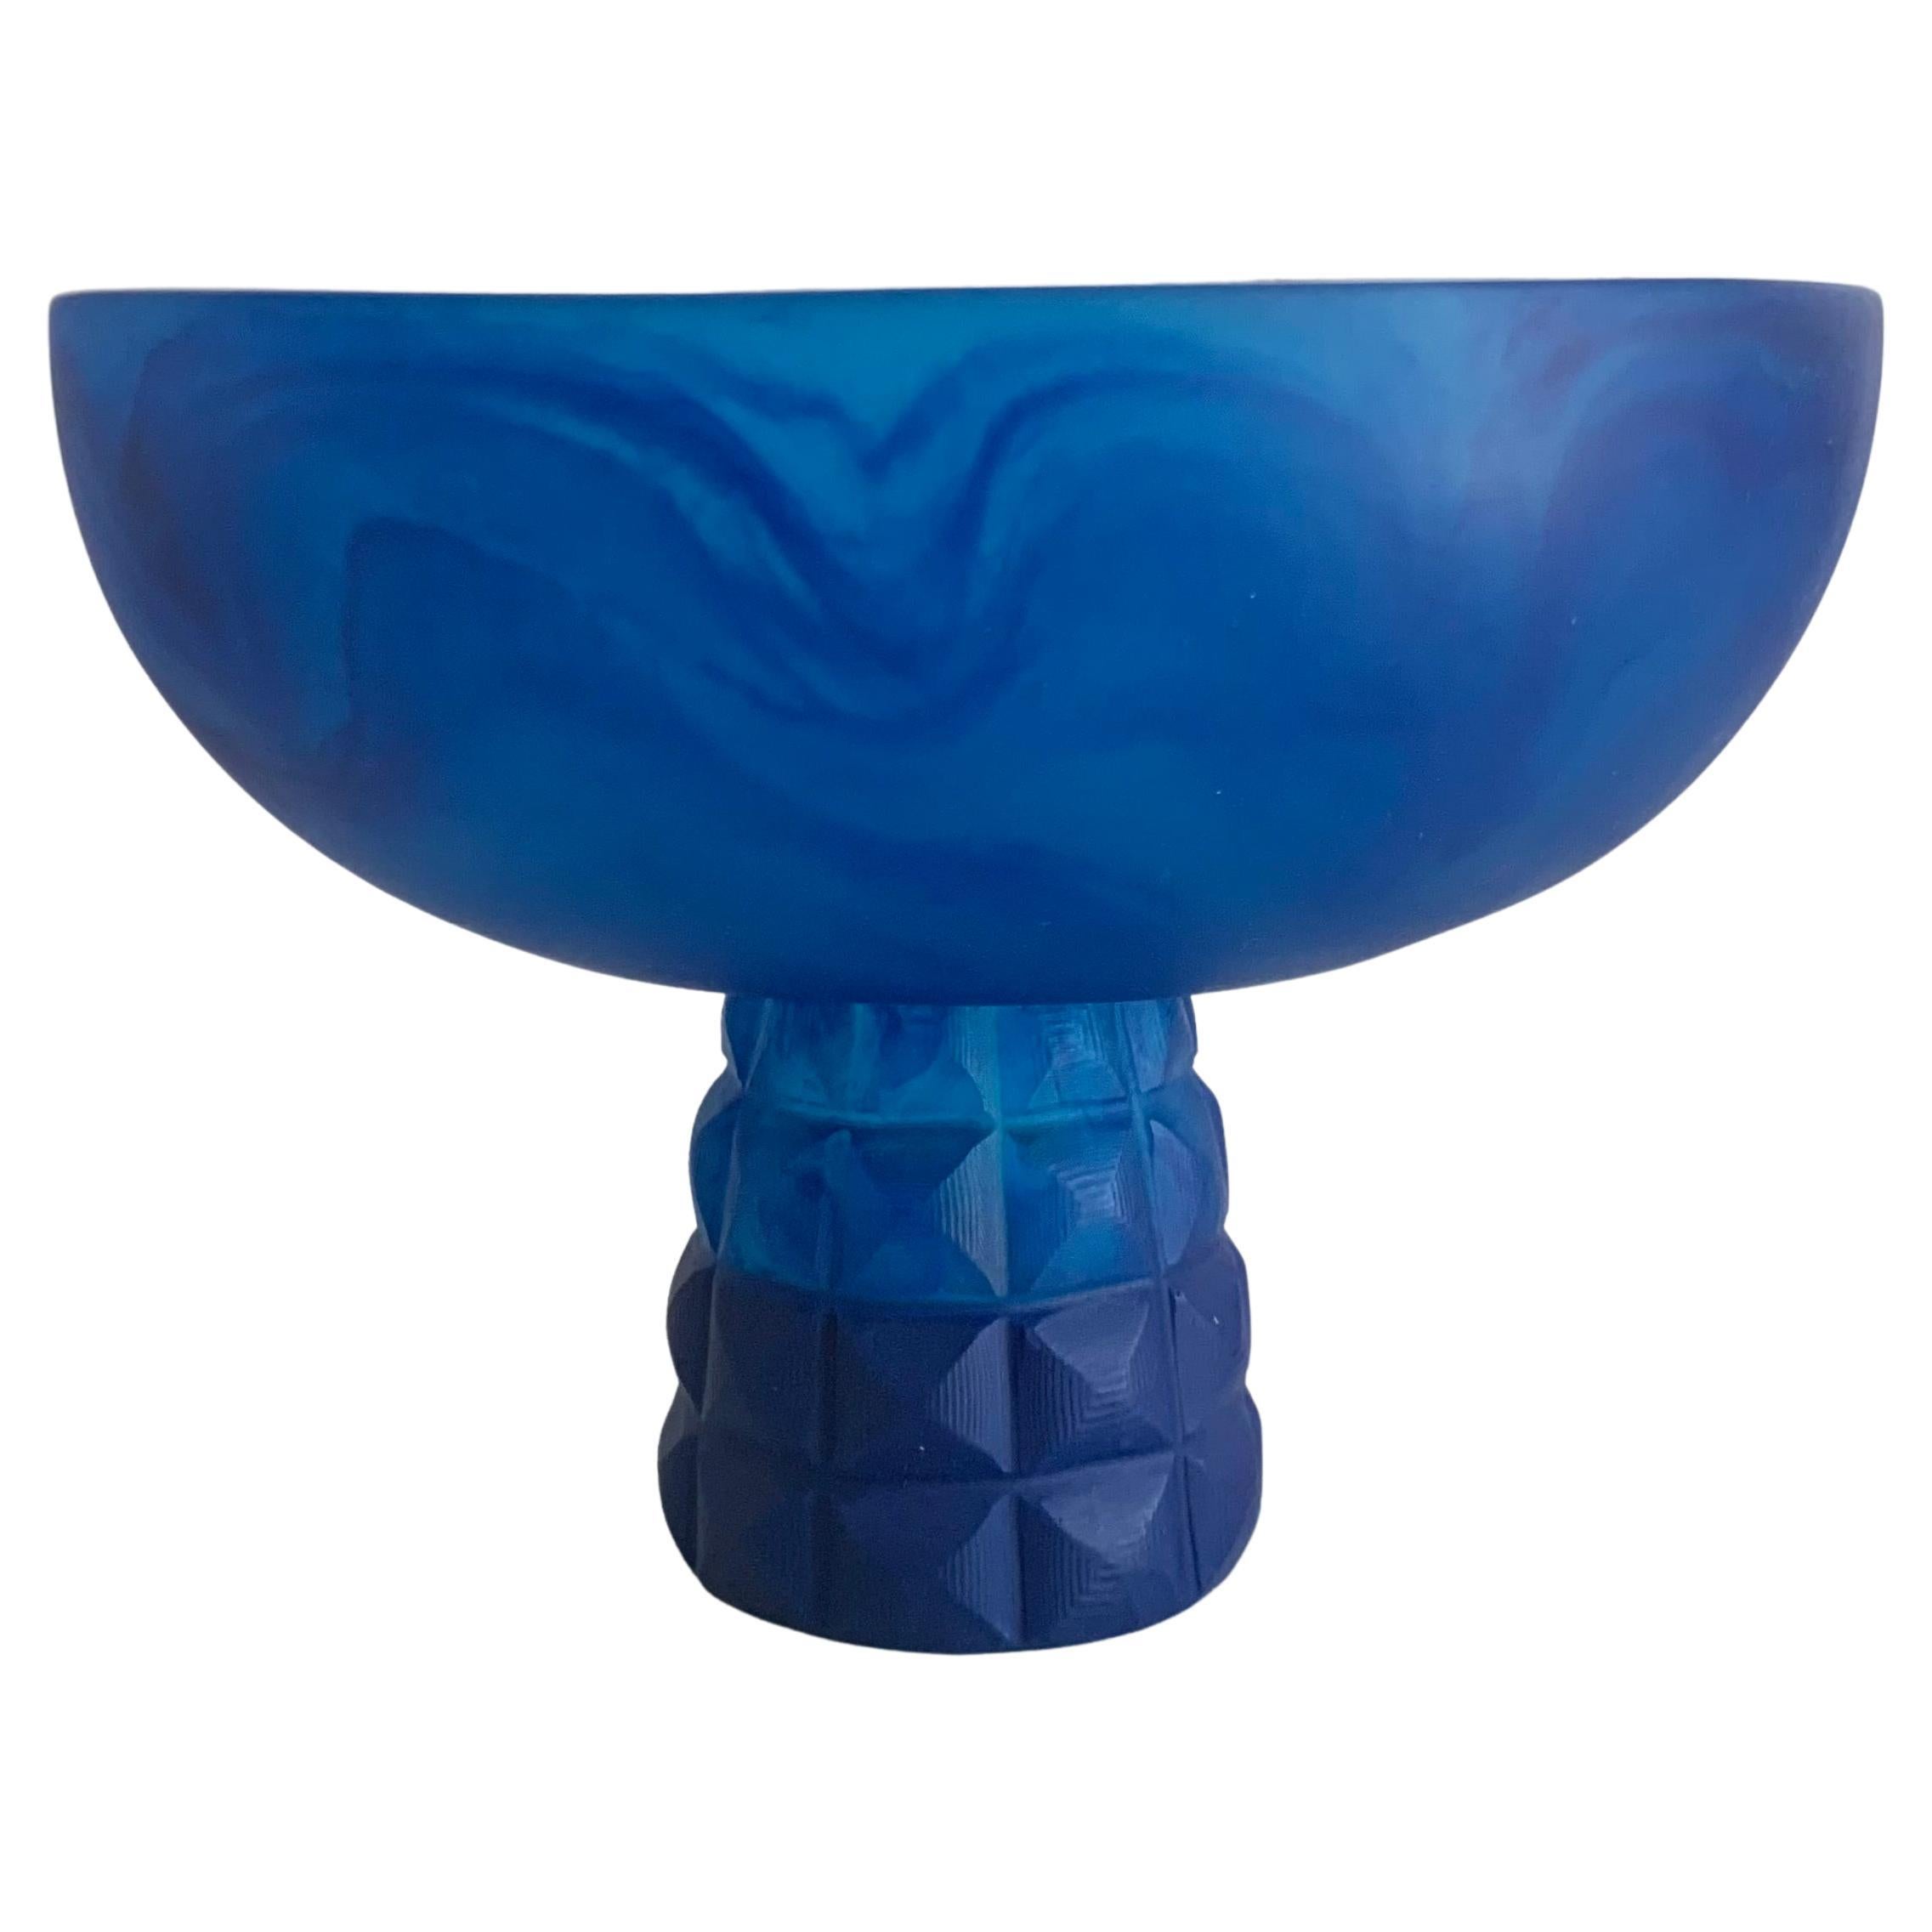 Geometric Pedestal Bowl in Blue Marbled Resin by Paola Valle